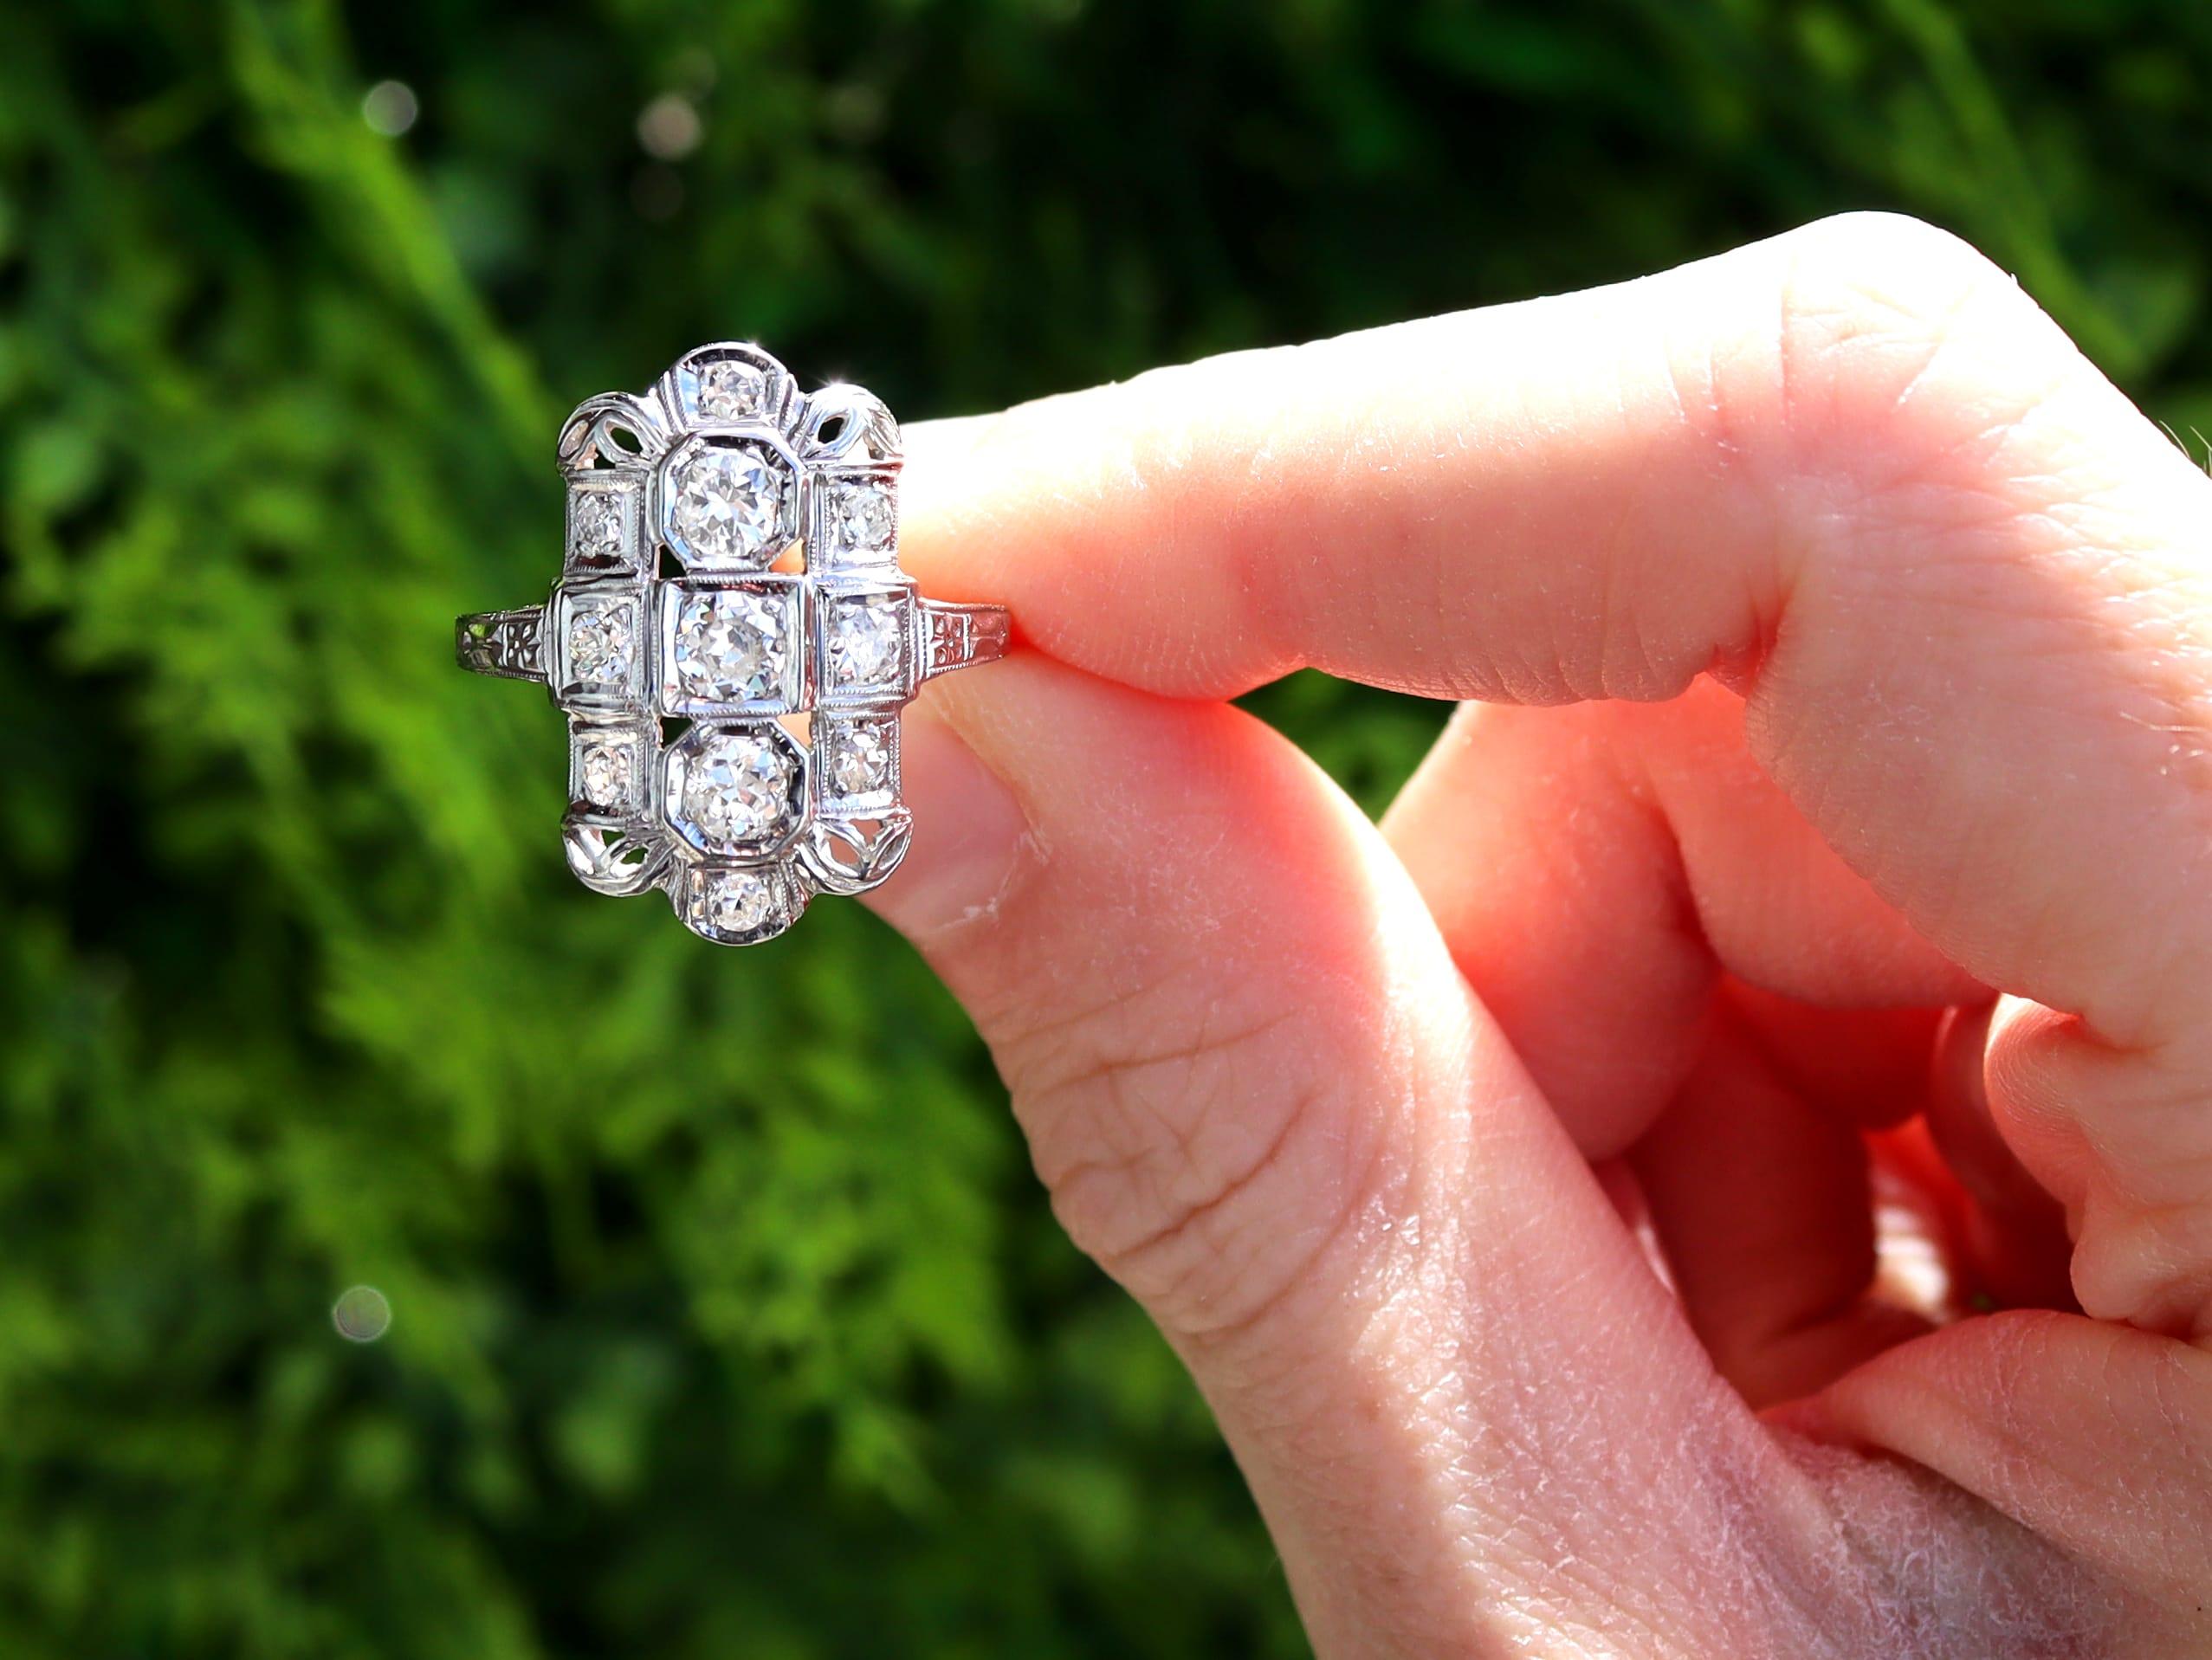 A stunning, fine and impressive antique 1.14 carat diamond and 18 karat white gold dress ring; part of our diverse 1920s diamond jewellery collection.

This stunning, fine and impressive vintage diamond ring has been crafted in 18k white gold.

The